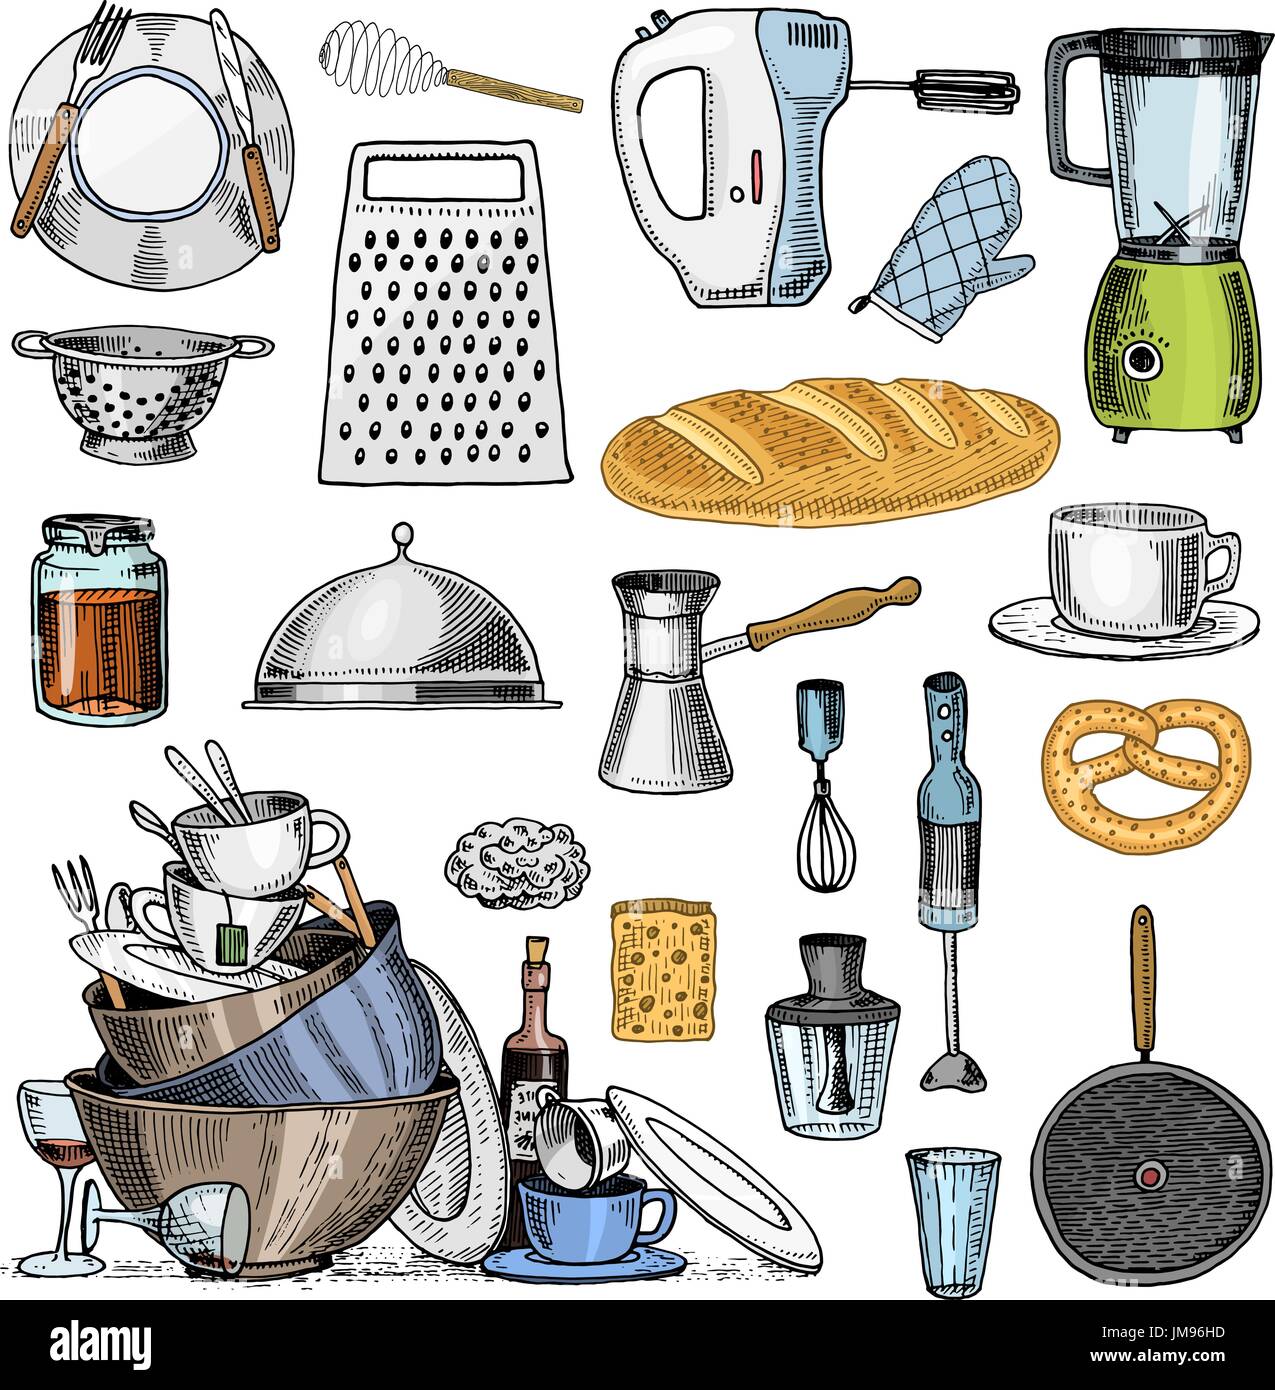 https://c8.alamy.com/comp/JM96HD/grater-and-whisk-frying-pan-turk-for-coffee-cup-of-tea-mixer-and-baked-JM96HD.jpg